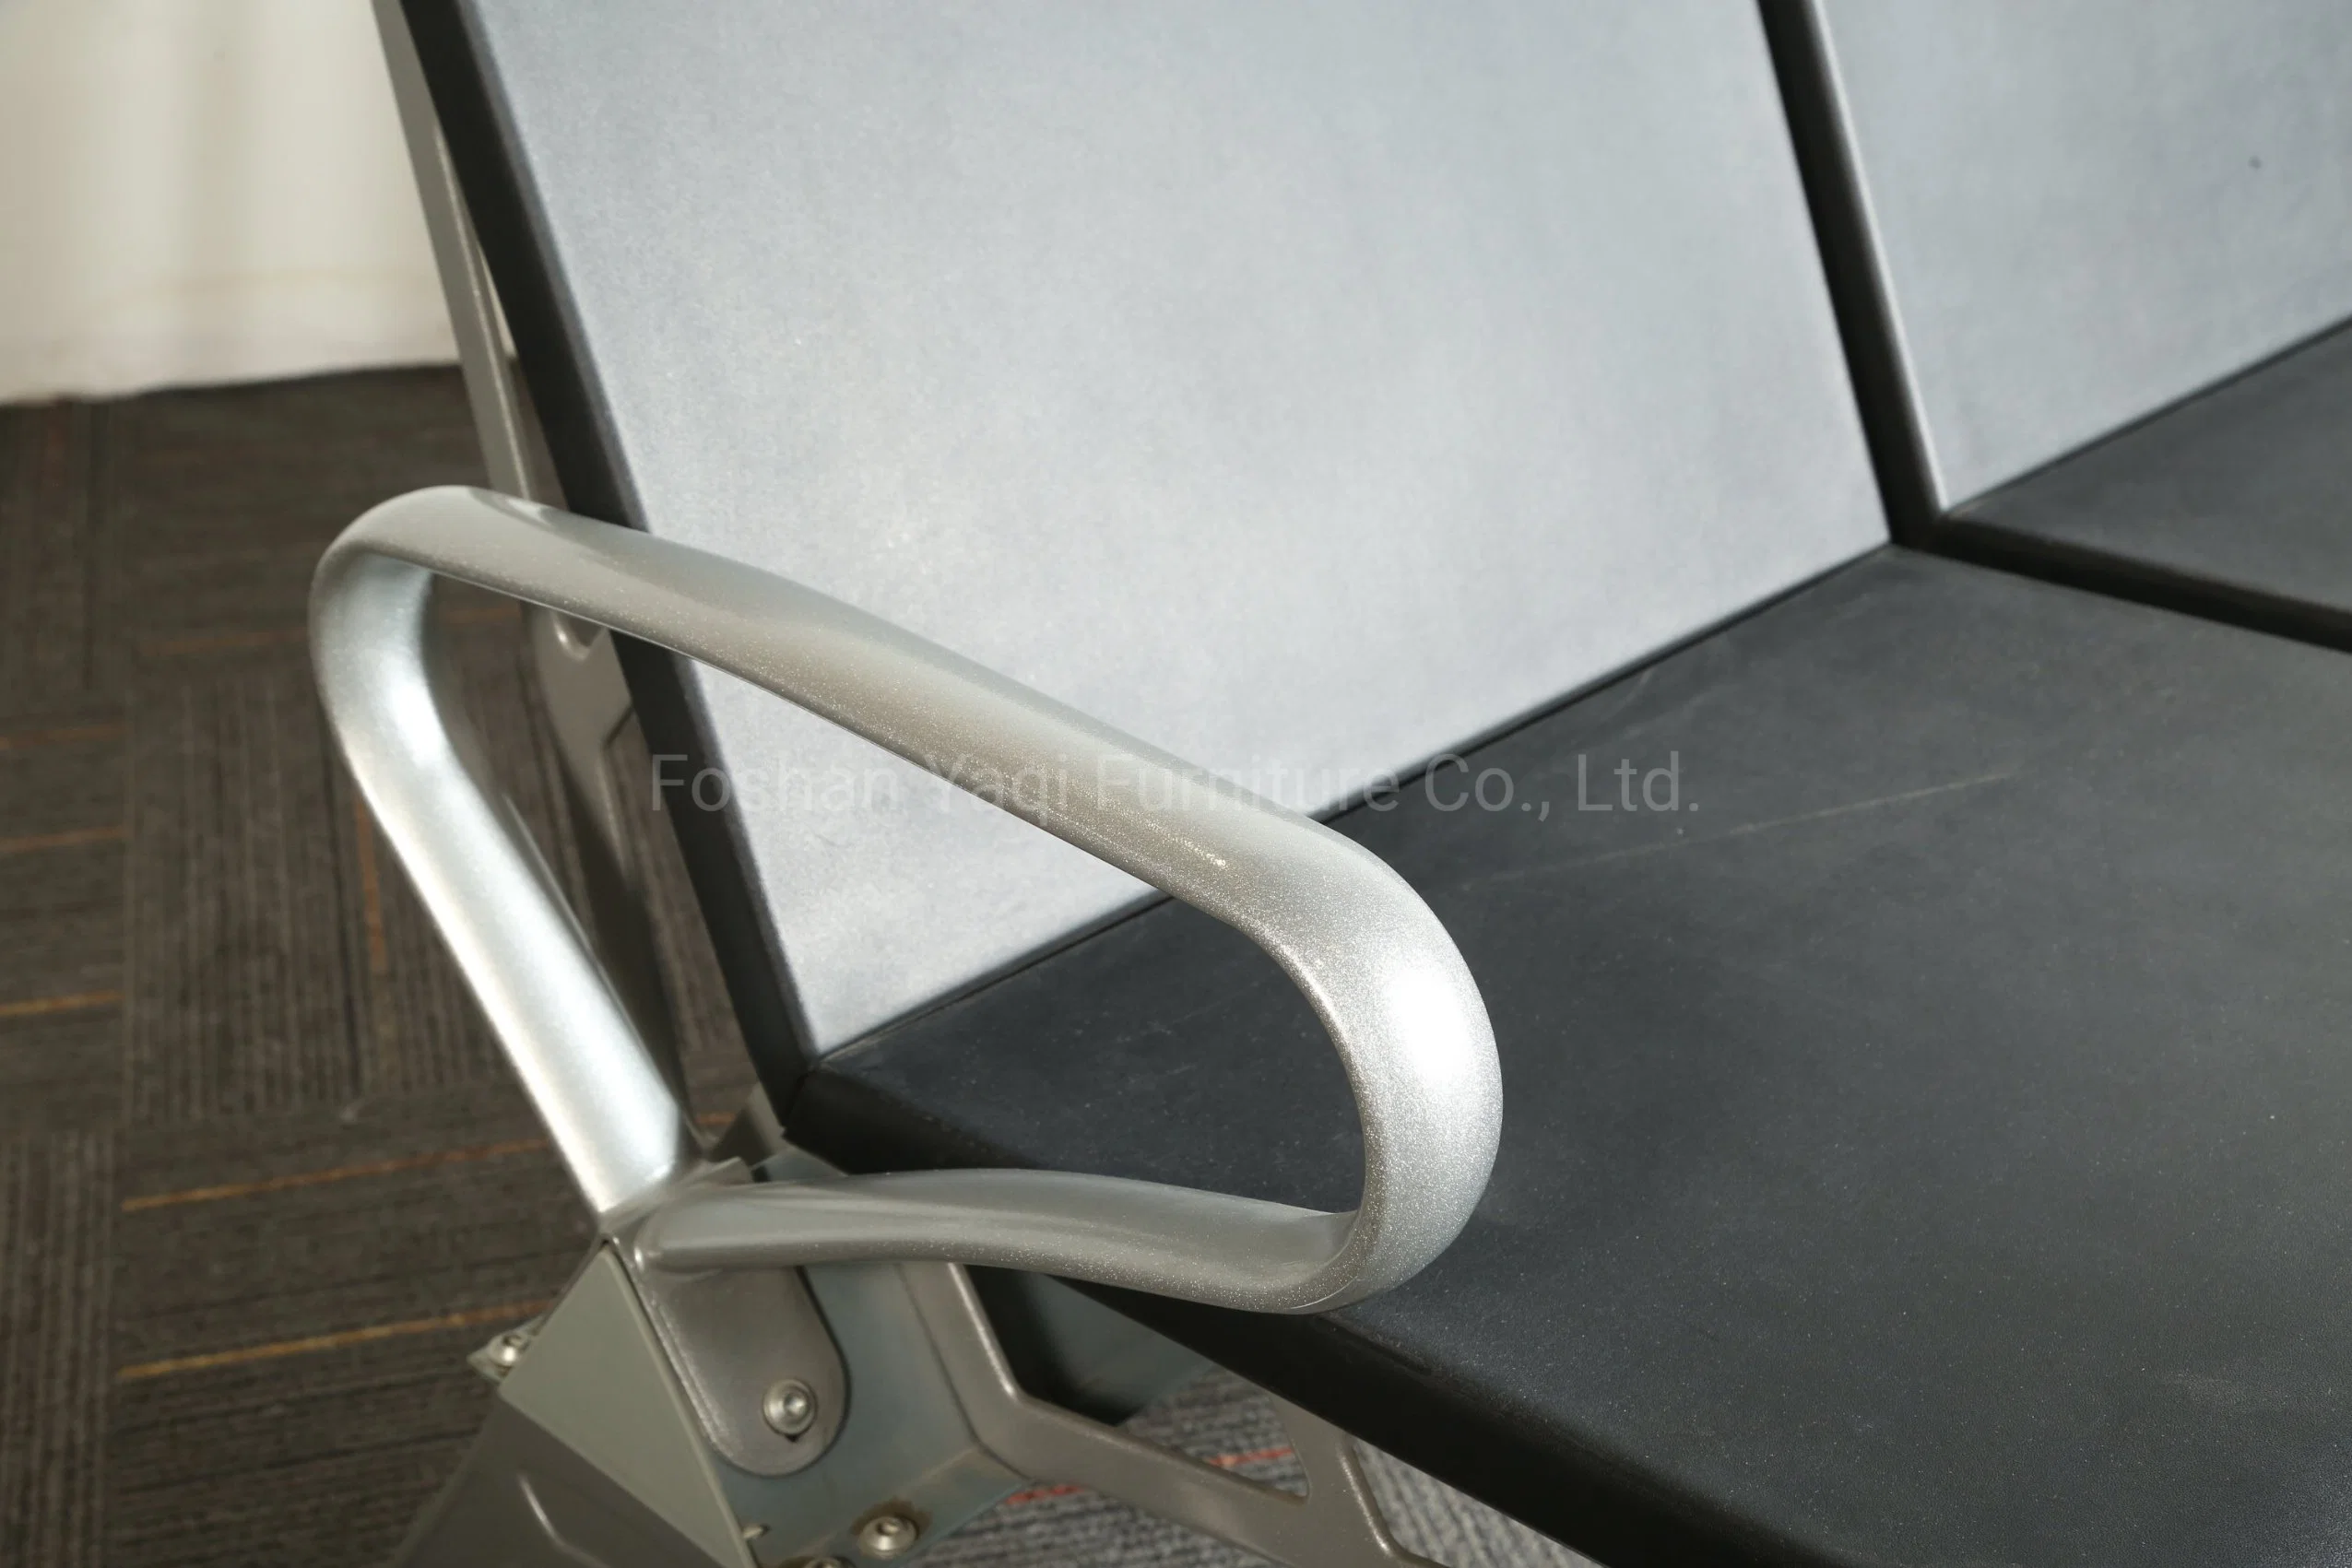 Manufacturer of Airport Hospital Chair Waiting Room Office Chair Metal Furniture (YA-J35C)